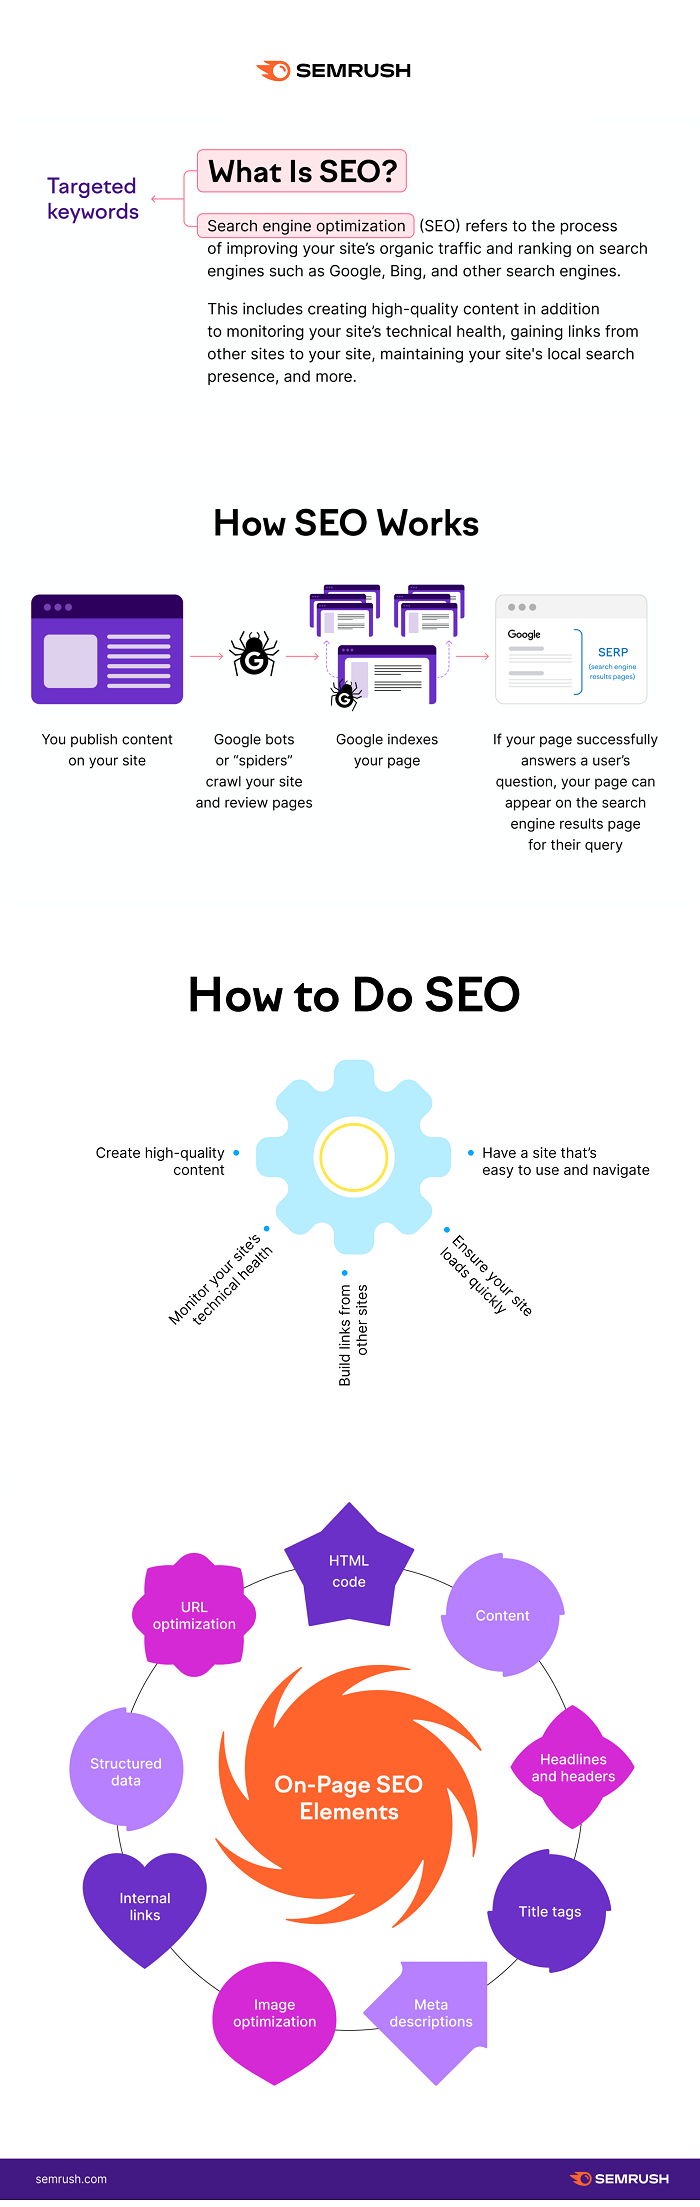 How to SEO infographic